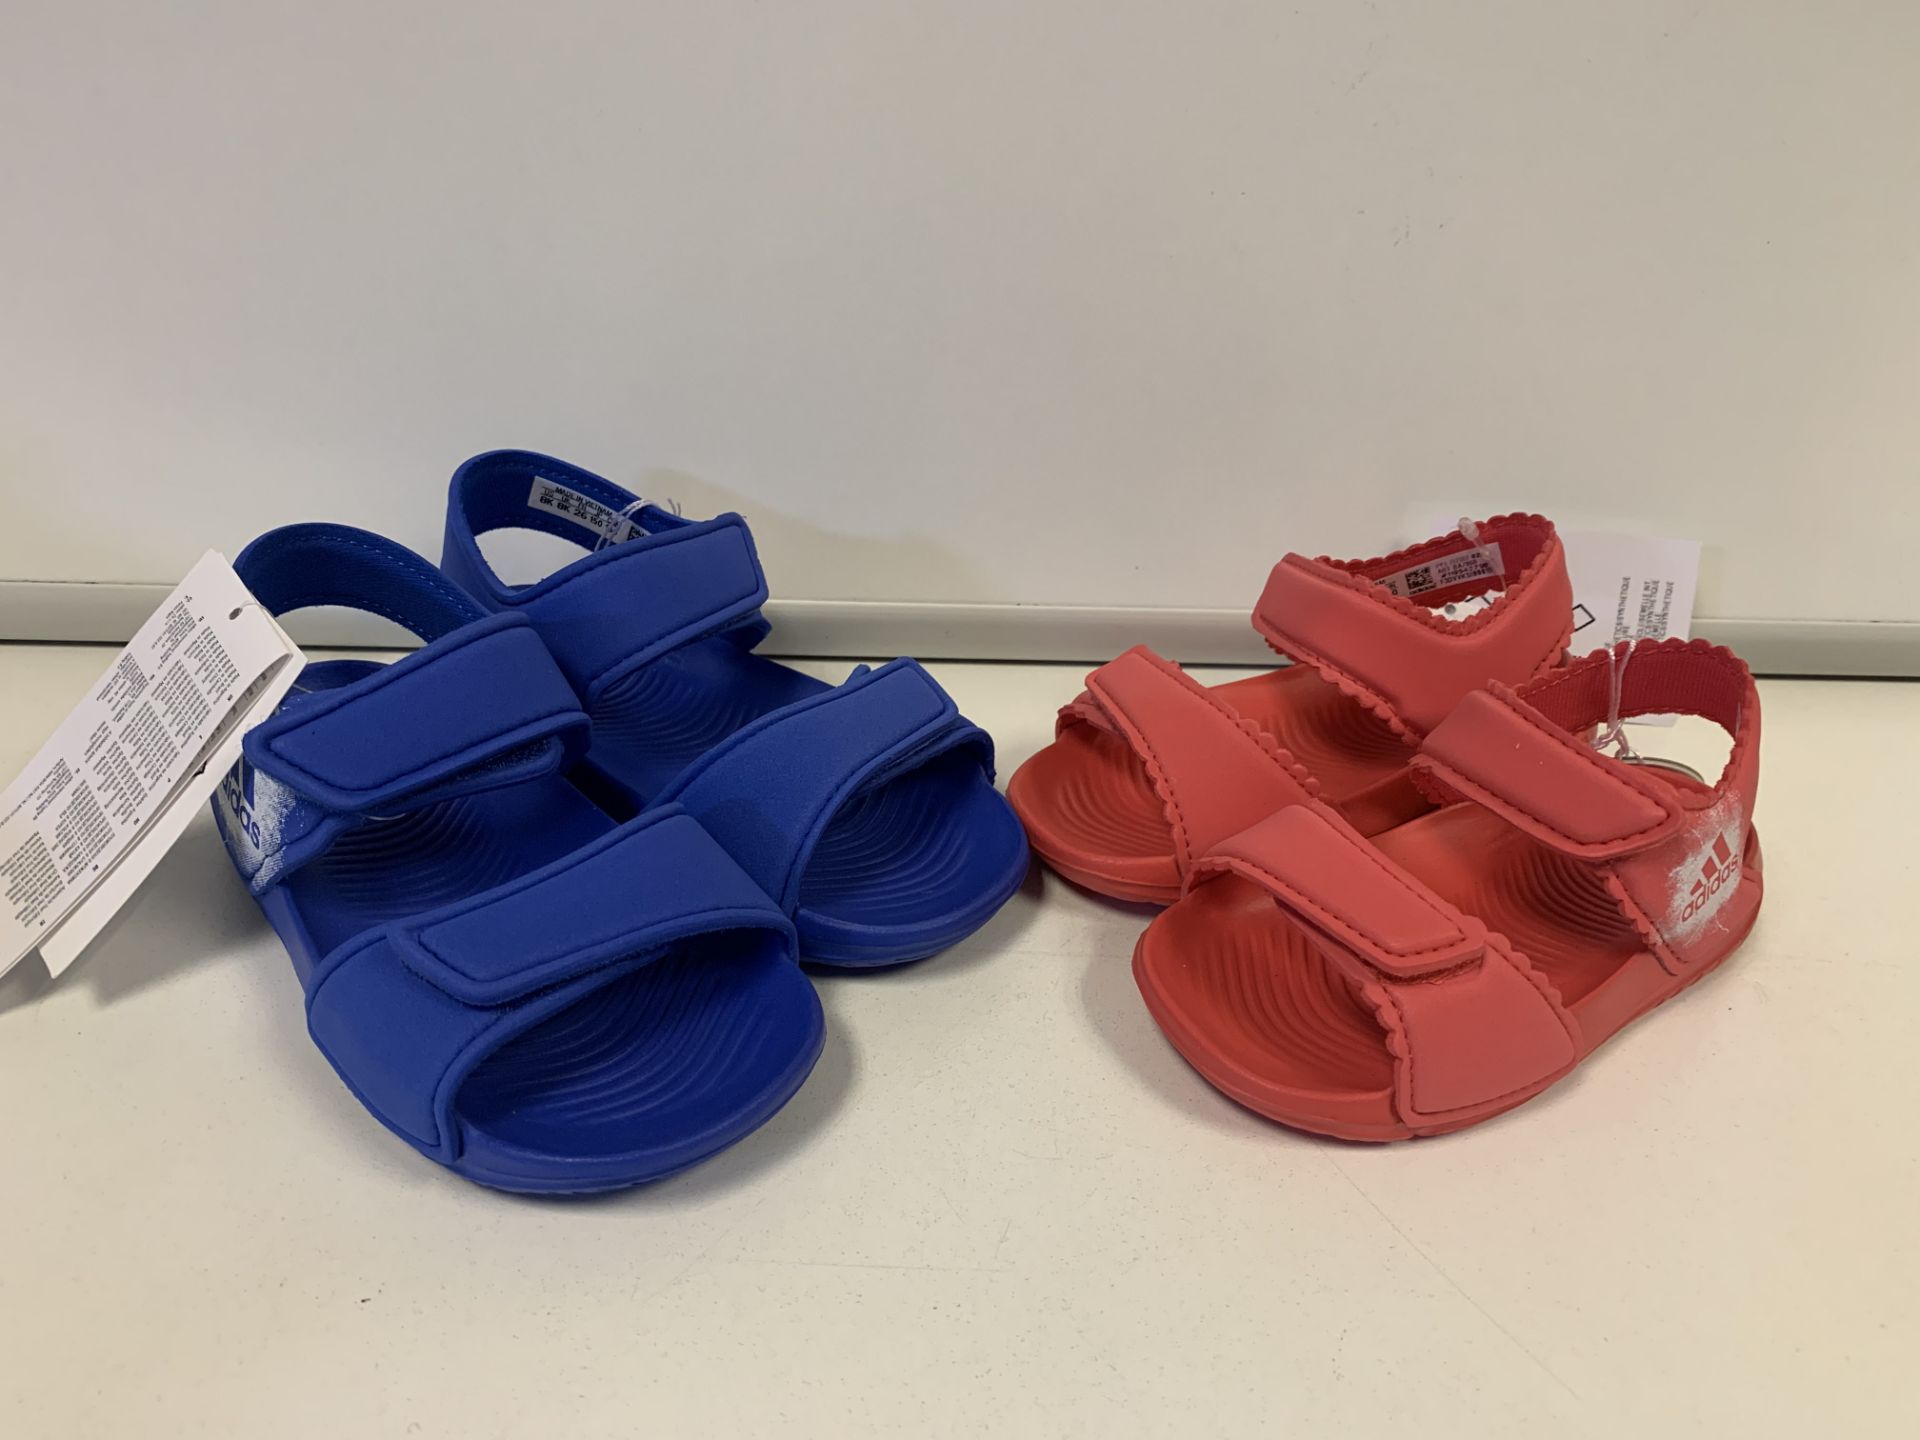 (NO VAT) 9 X BRAND NEW ADIDAS ALTA SANDALS IN VARIOUS SIZES AND COLOURS